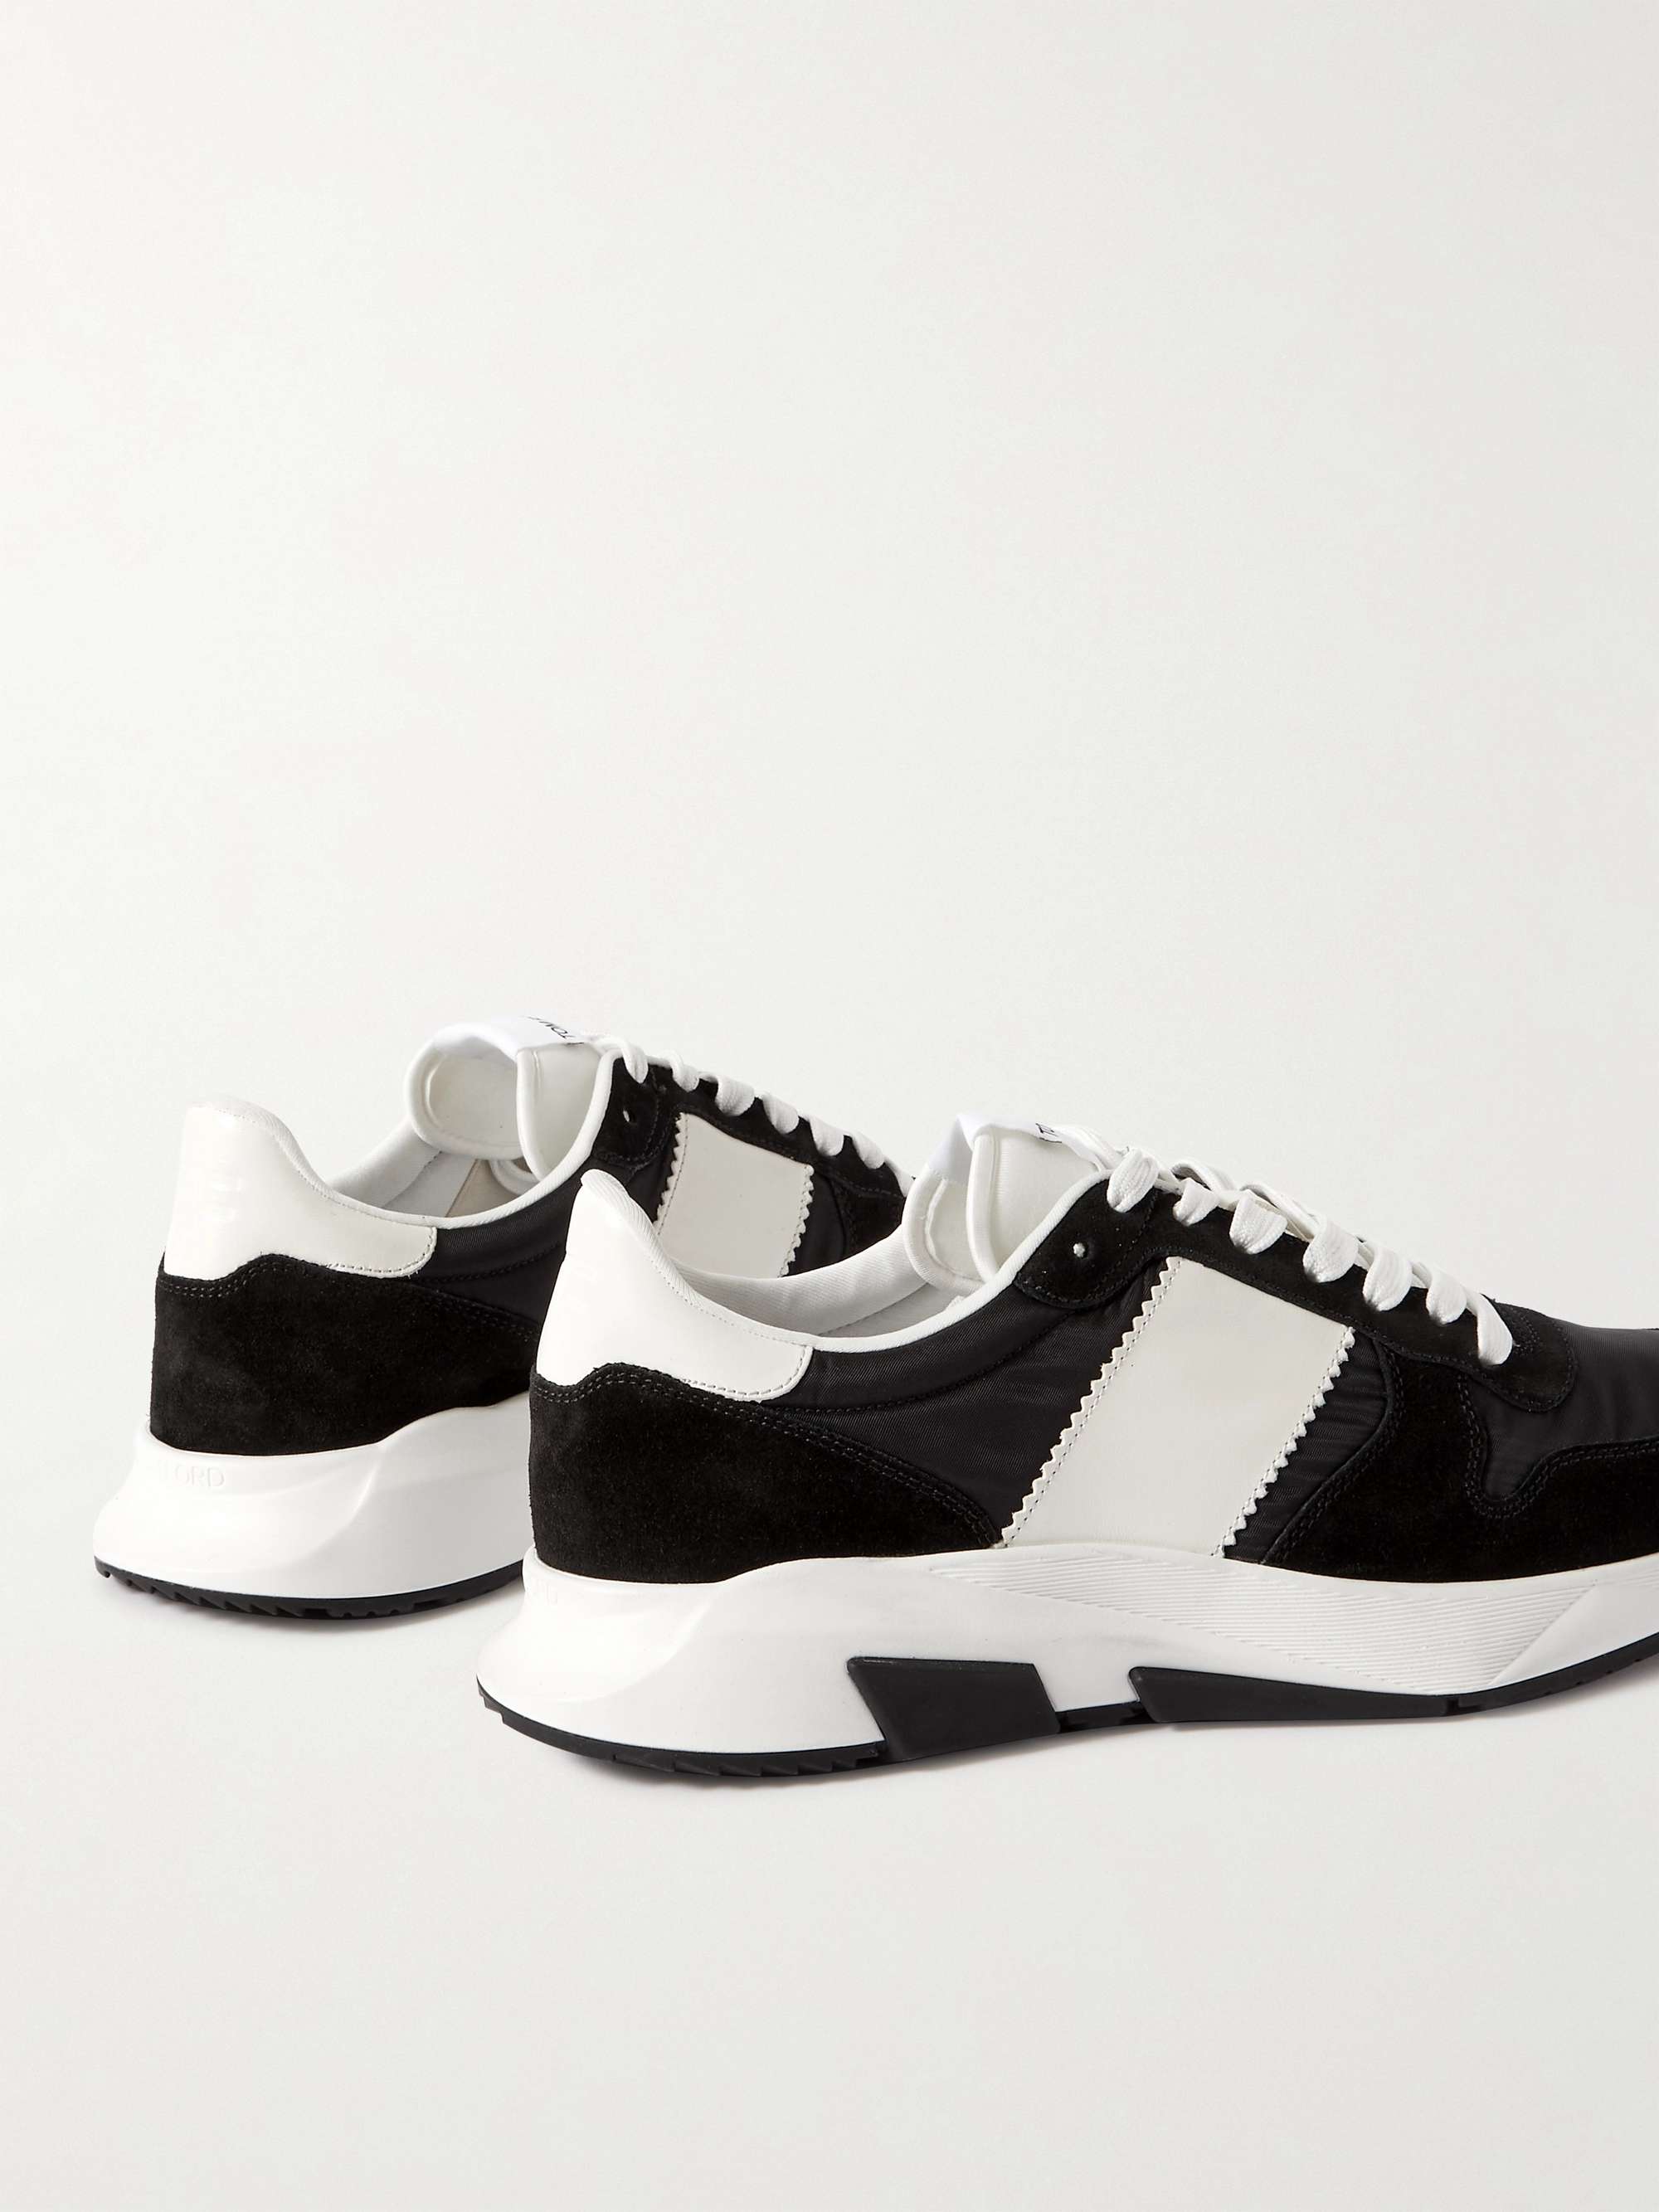 TOM FORD Jagga Leather-Trimmed Nylon and Suede Sneakers